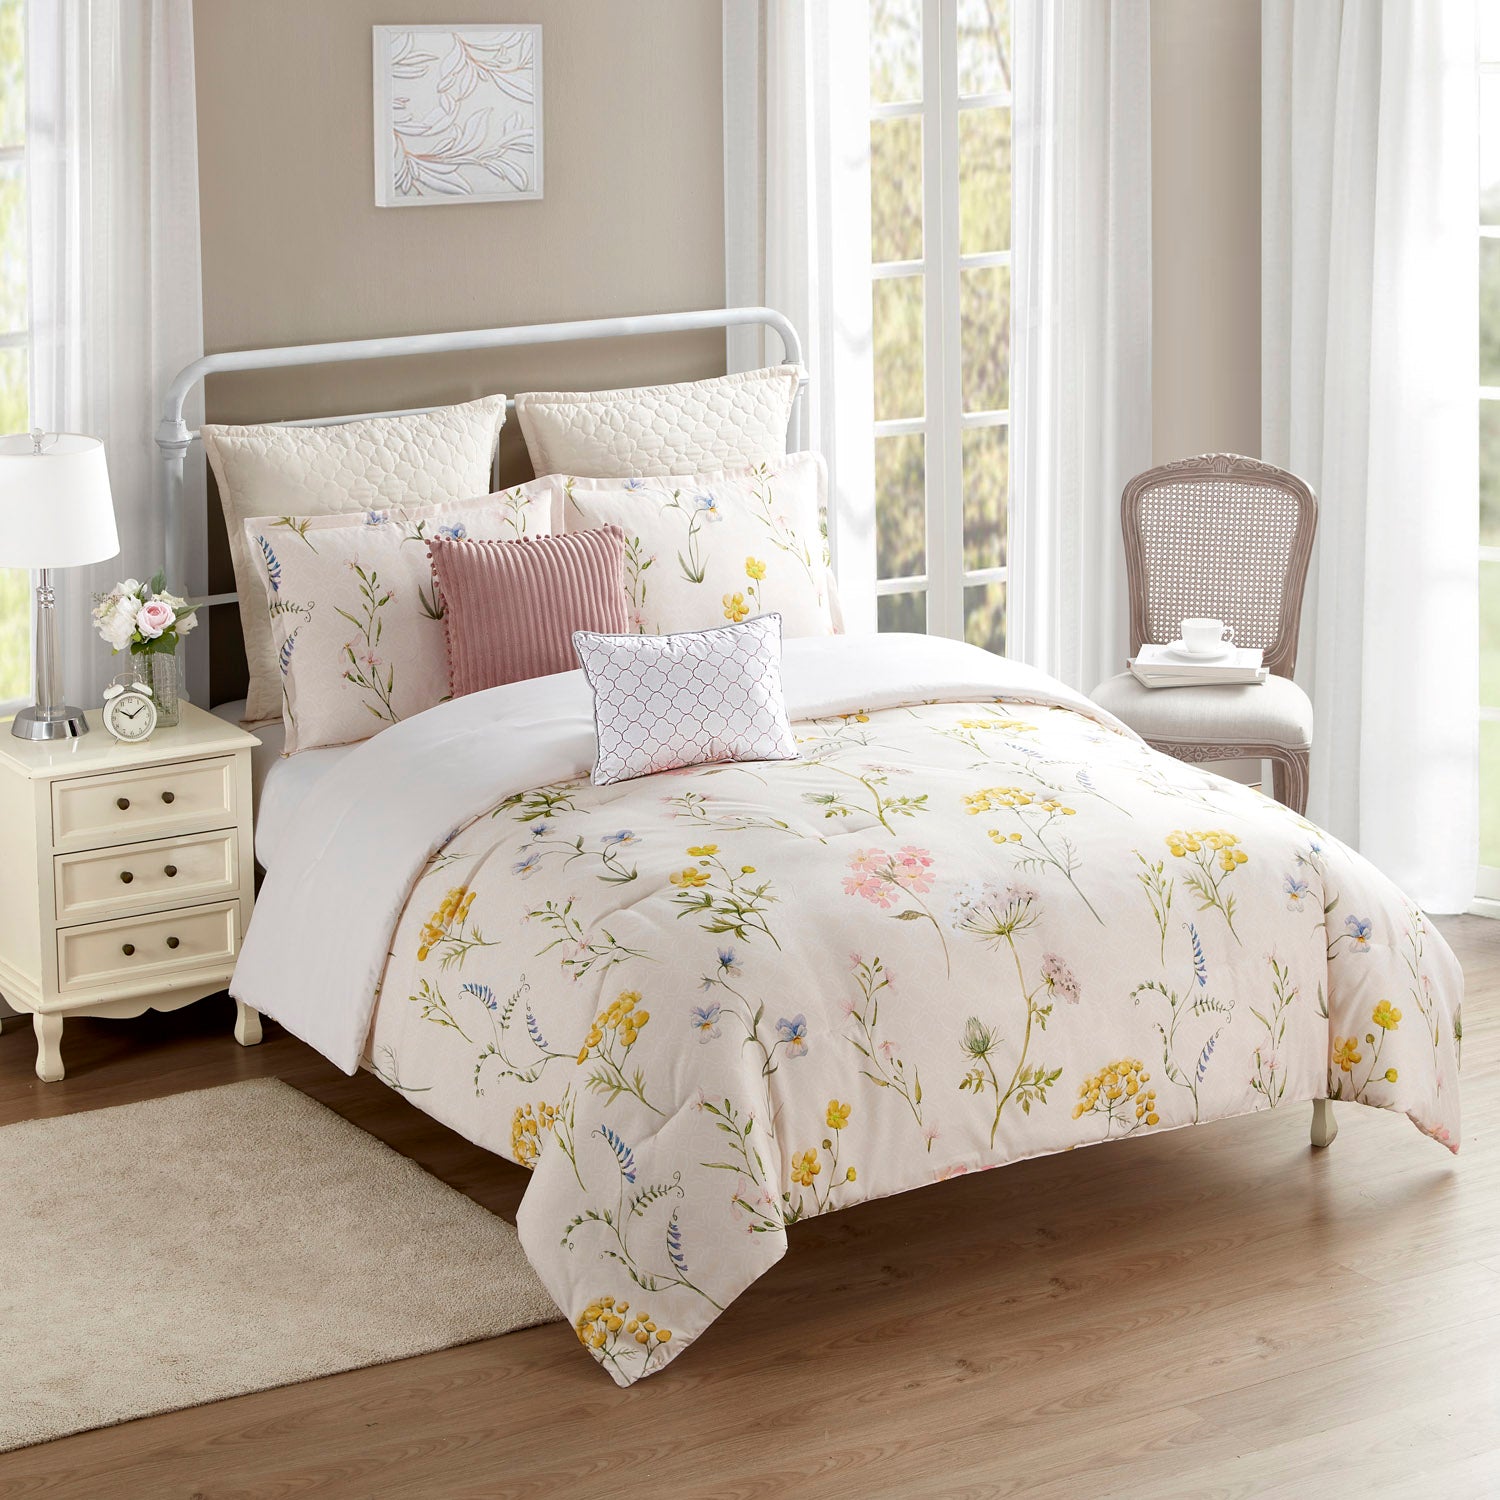 Mazie Flowers 7-Piece Bed in a Bag Set - Bed